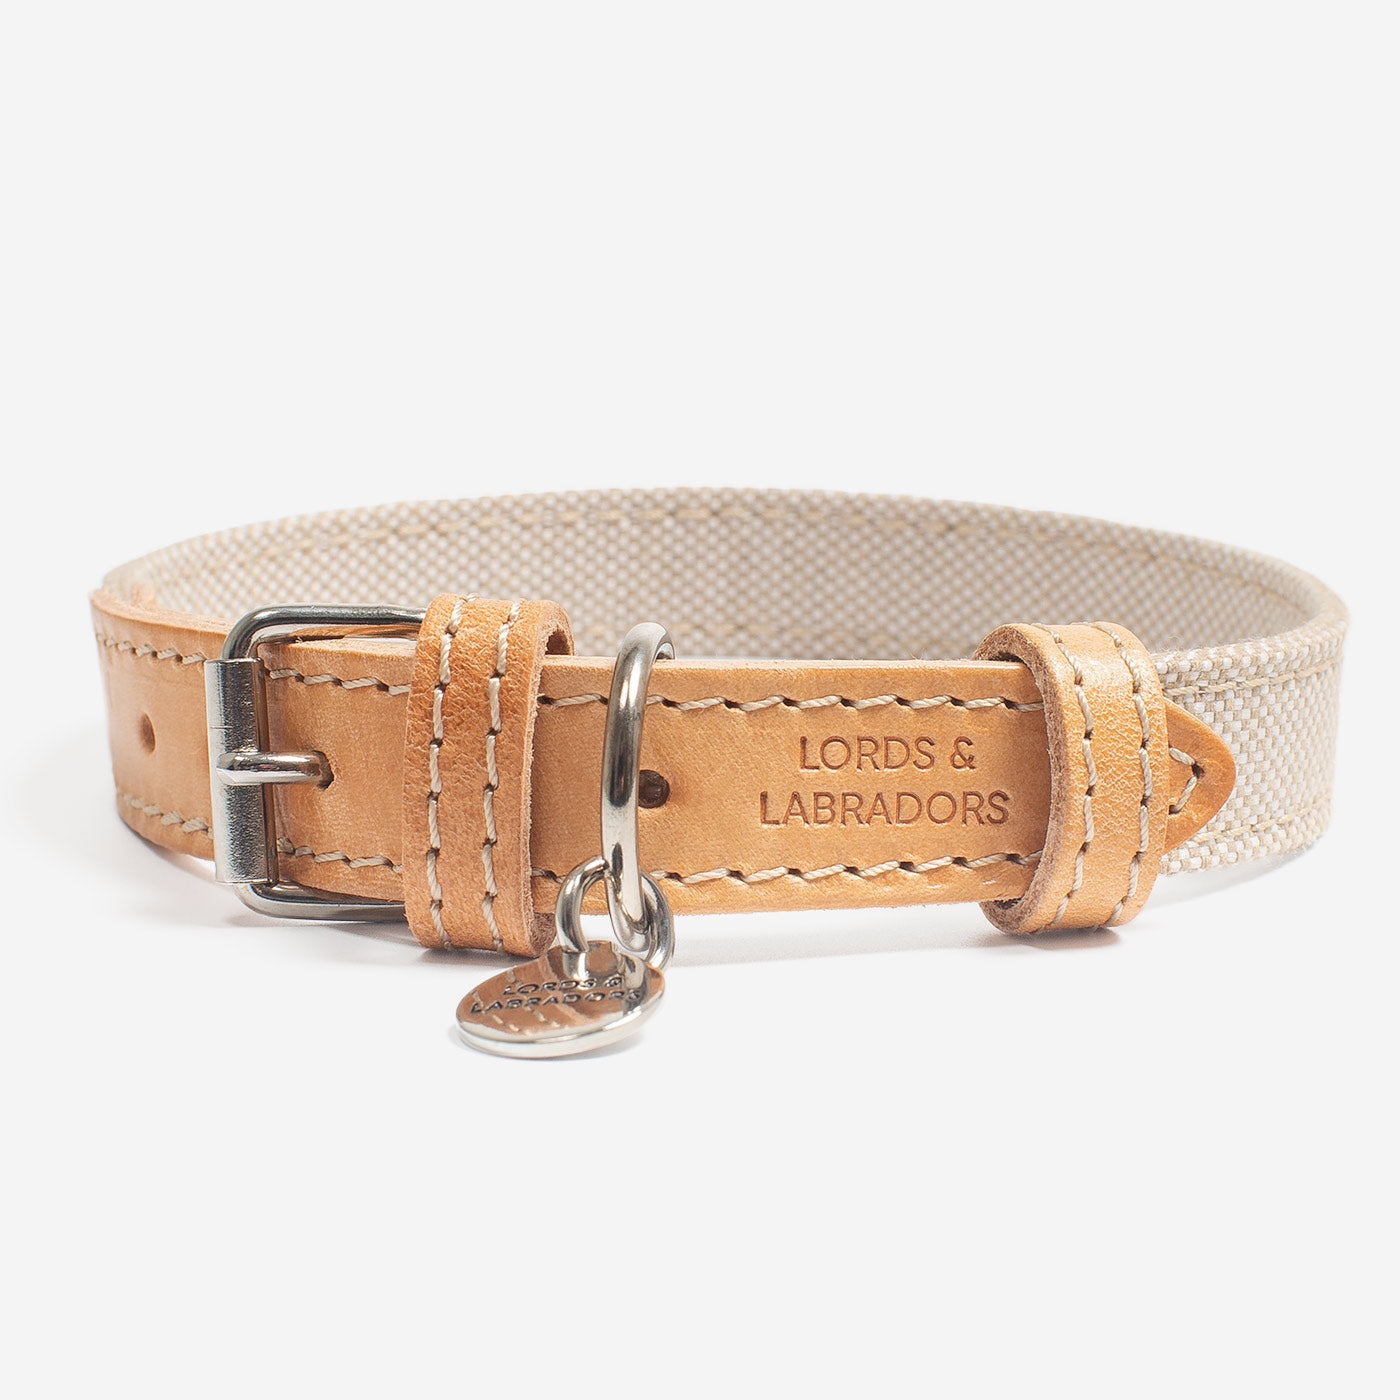 Discover dog walking luxury with our handcrafted Italian dog collar in beautiful essentials twill cream linen with cream fabric! The perfect collar for dogs available now at Lords & Labradors 